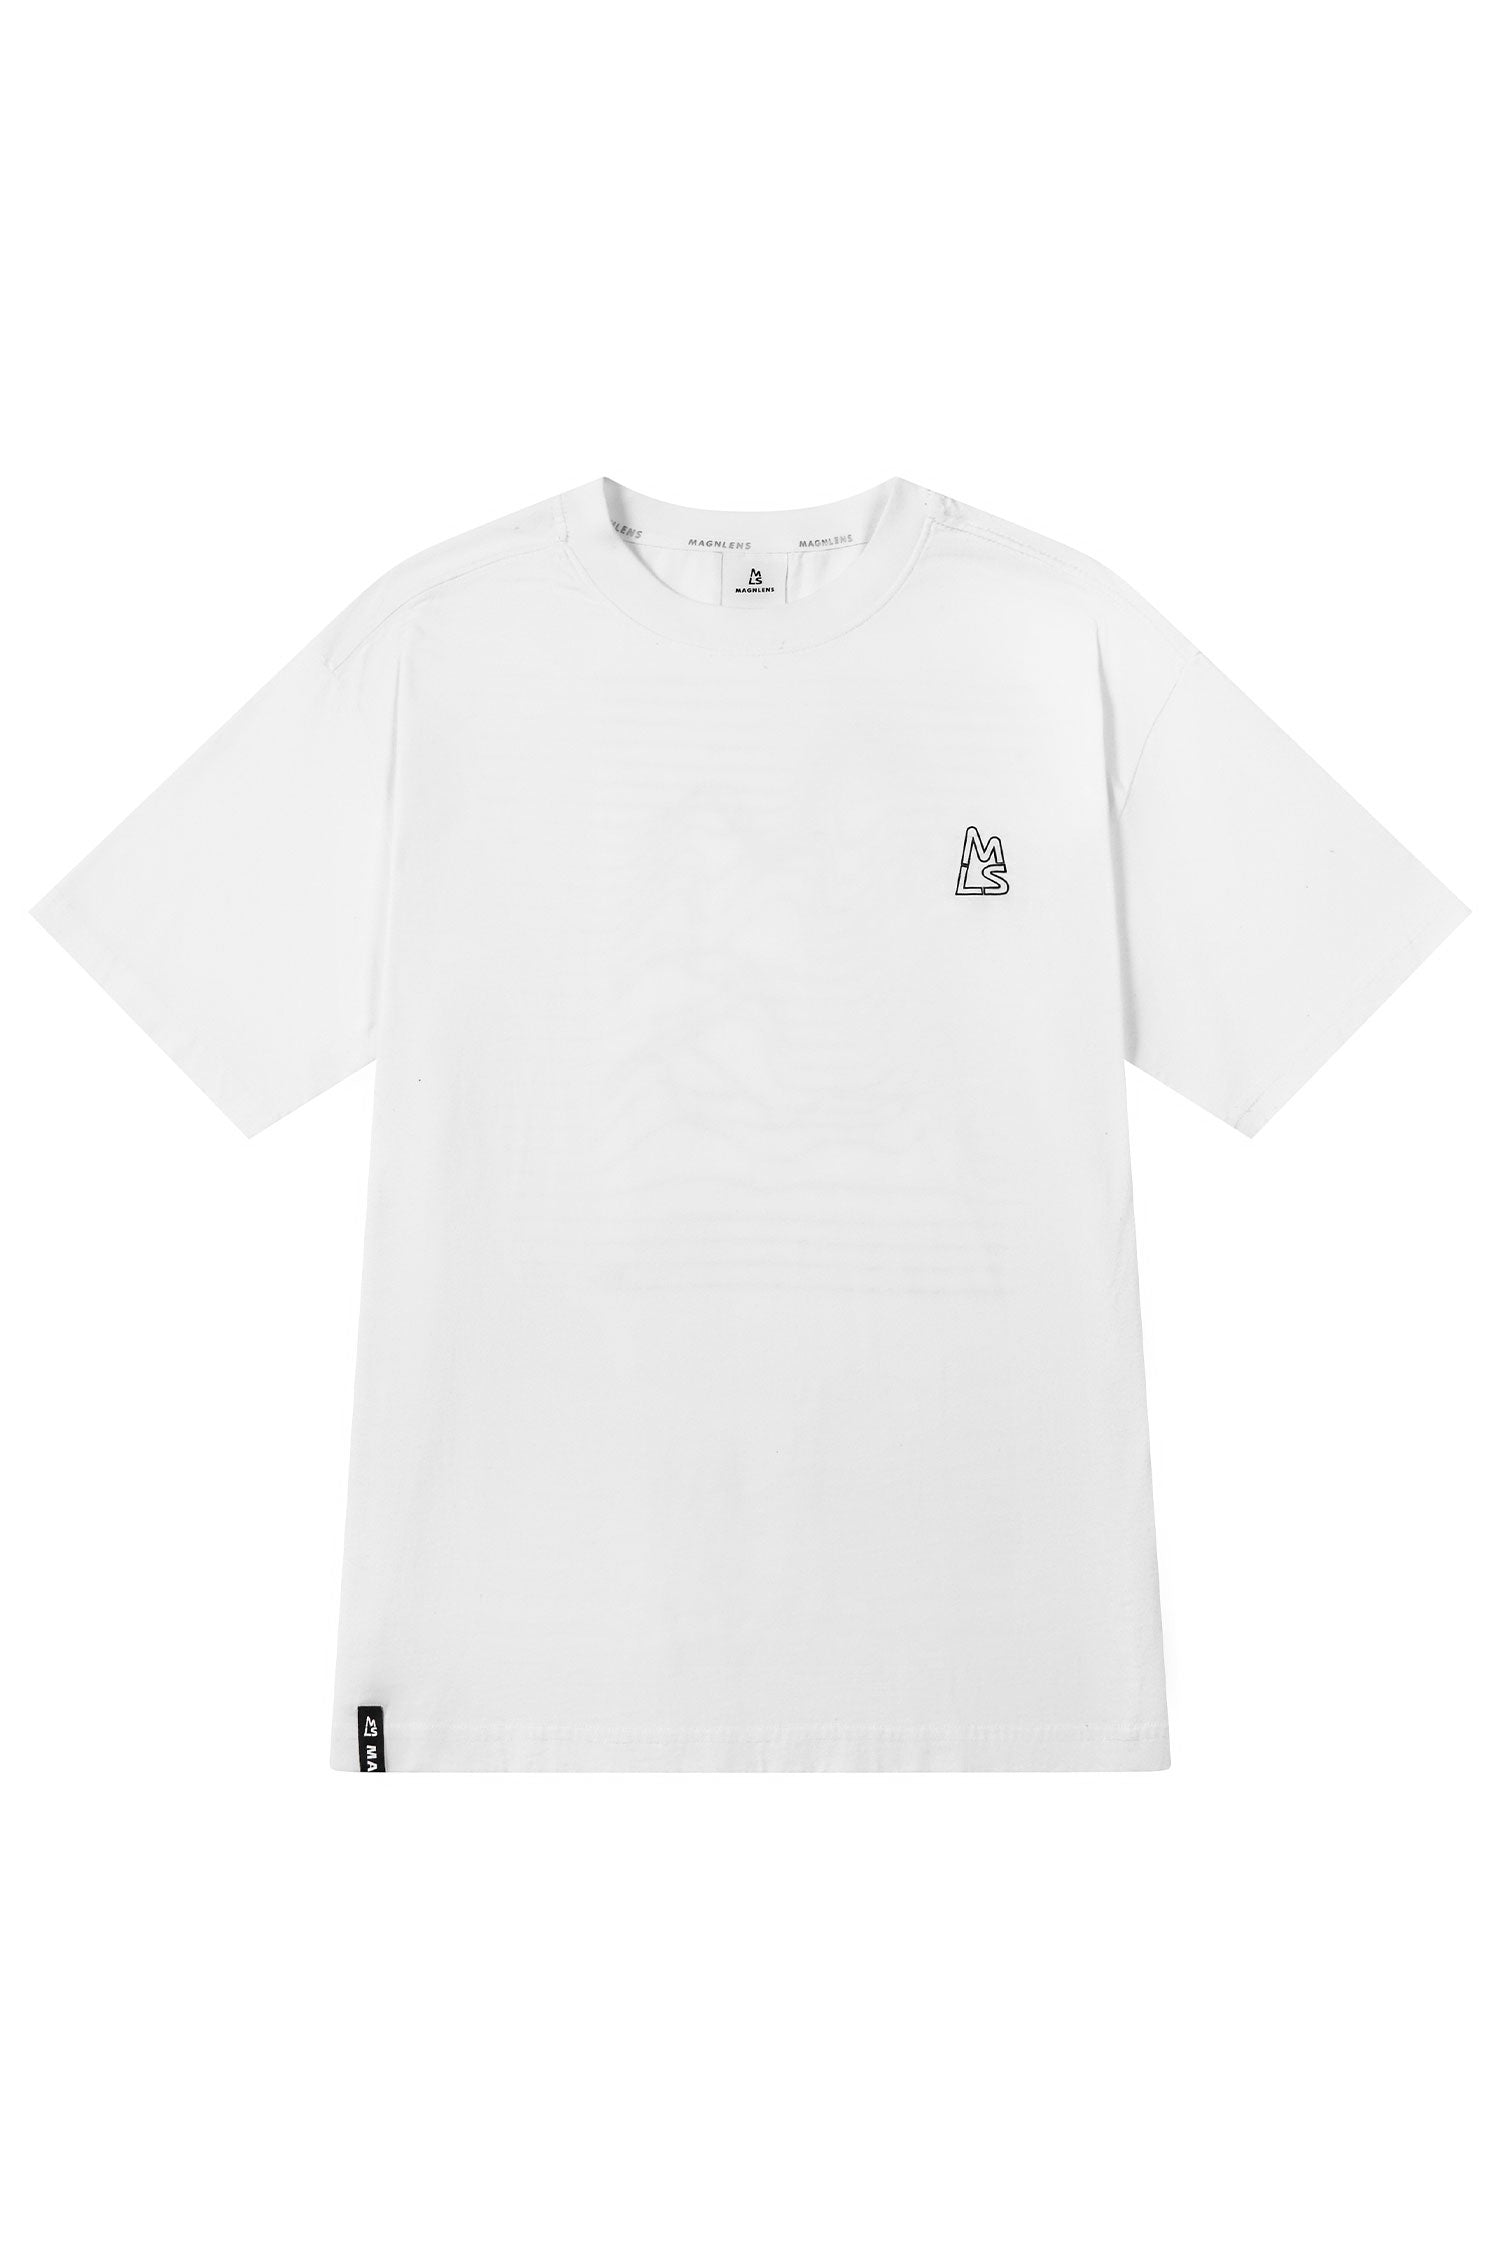 Waves Relaxed Graphic Tee